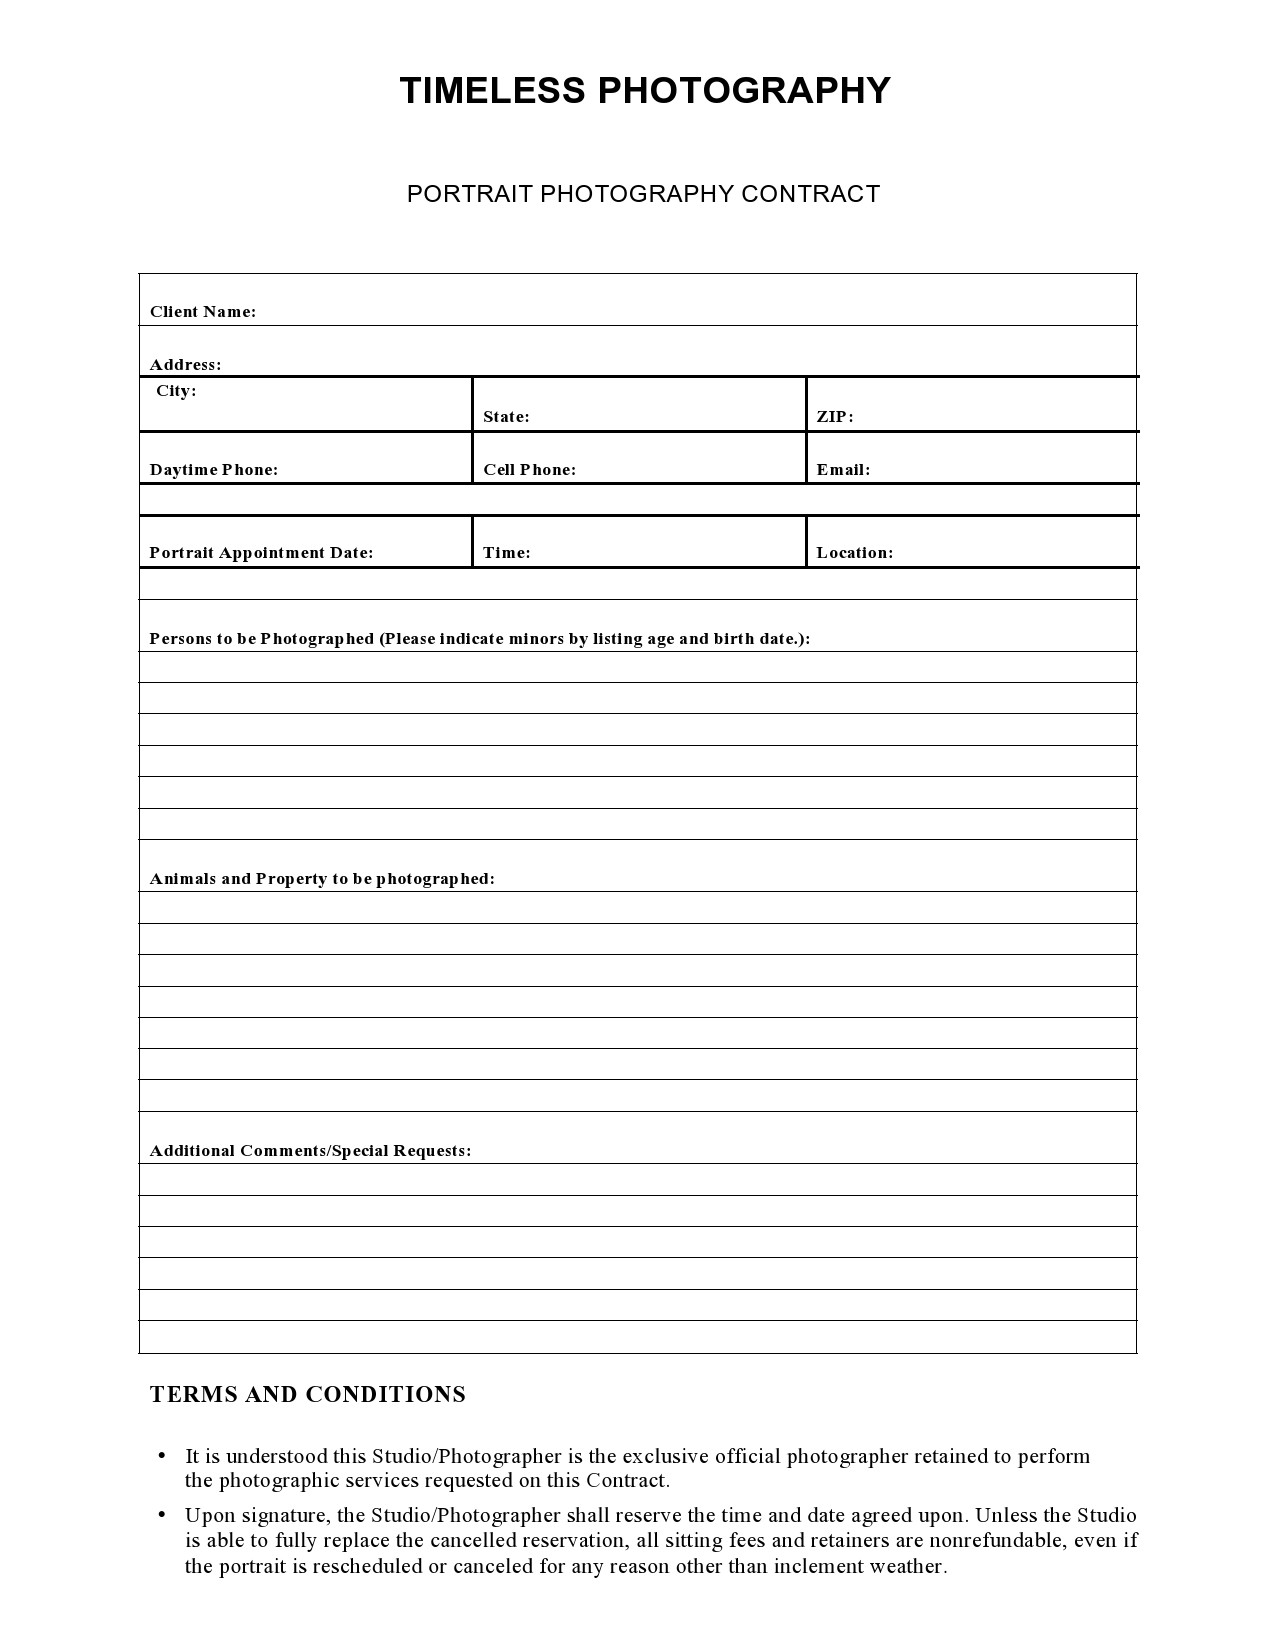 Free photography contract template 15